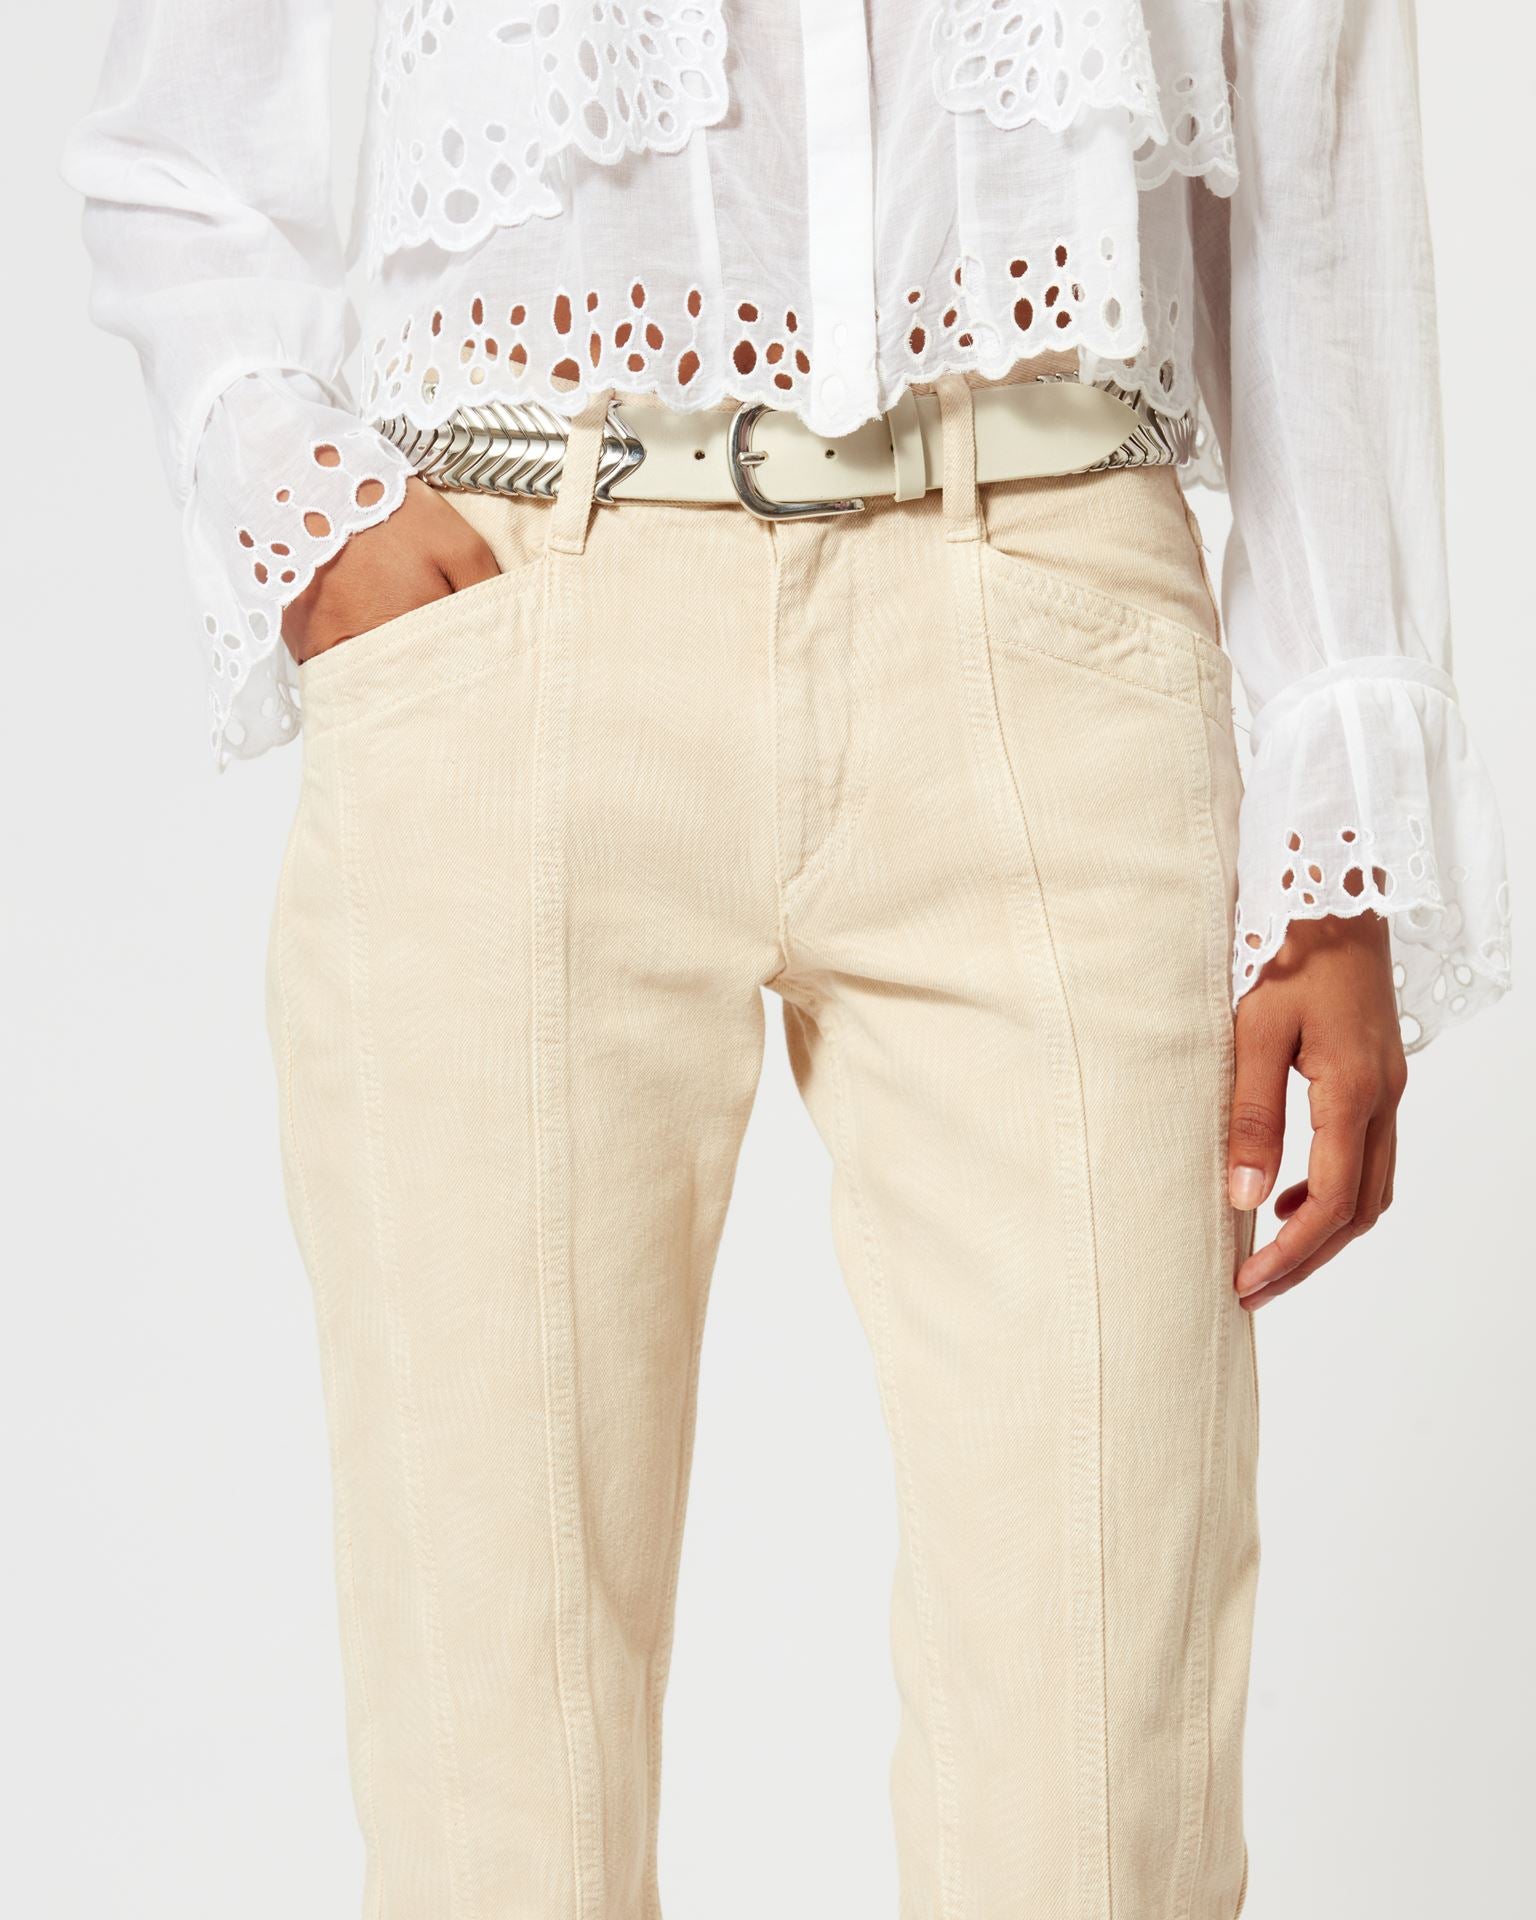 The Isabel Marant Driane Cotton Pants in Ecru available at The New Trend Australia